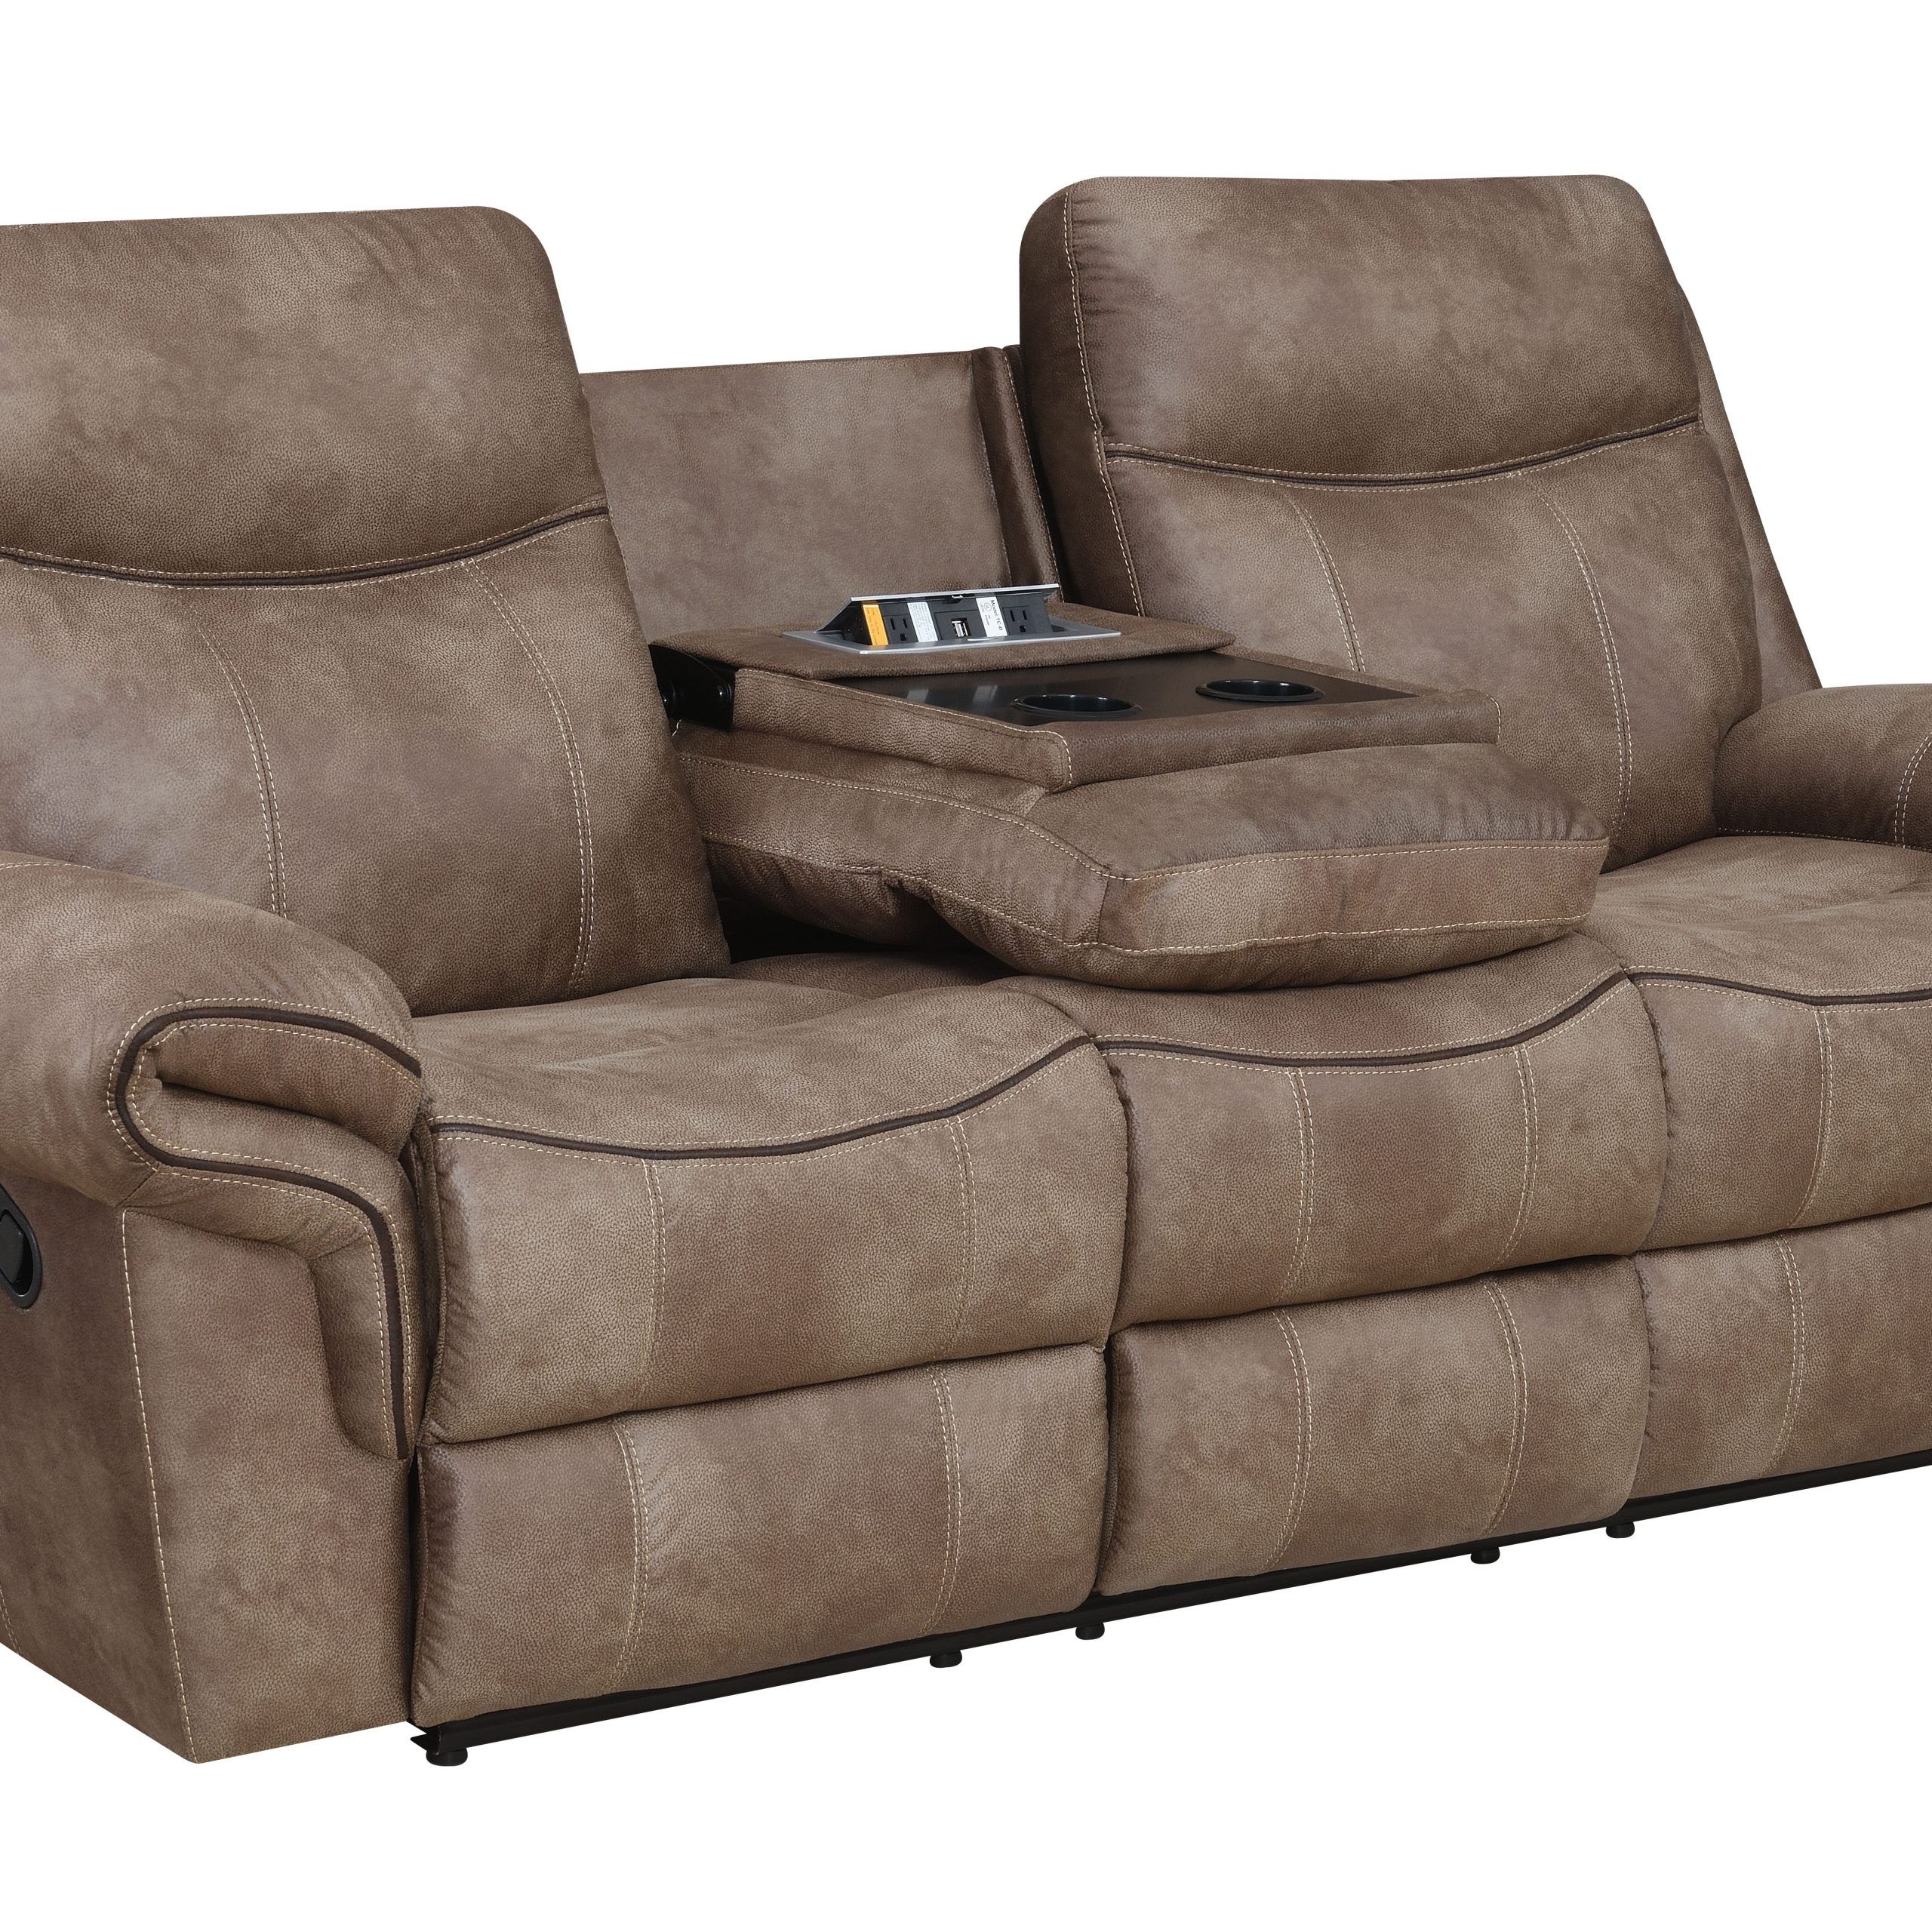 Steve Silver Nh850s Nashville Cocoa Reclining Sofa With Drop Down Table Intended For Cocoa Console Tables (View 12 of 20)